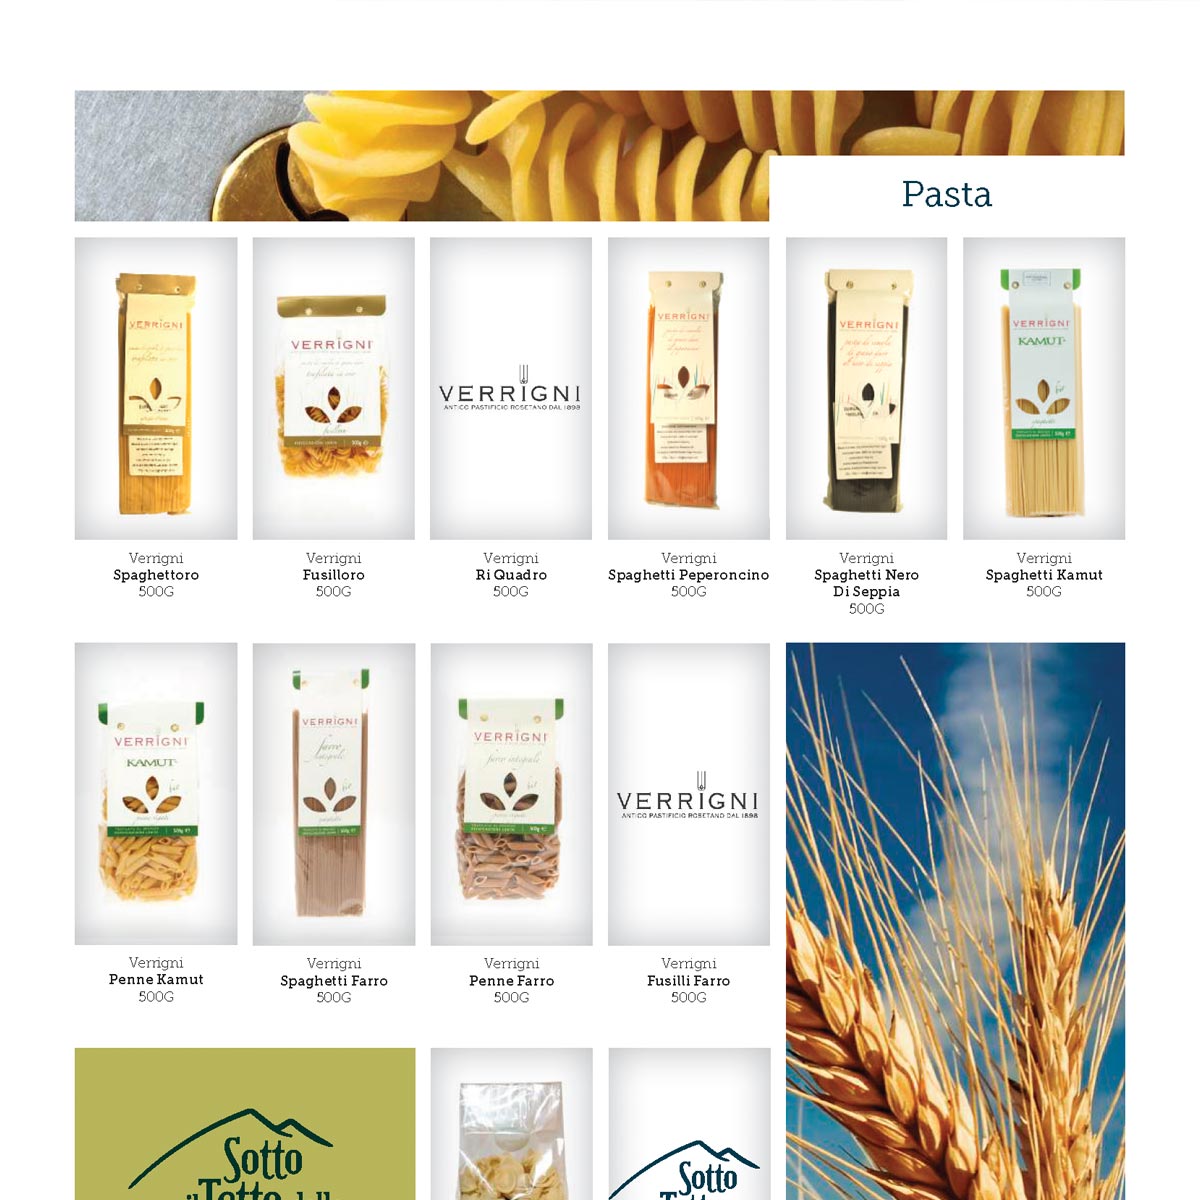 Page design for Artisanal Pantry.